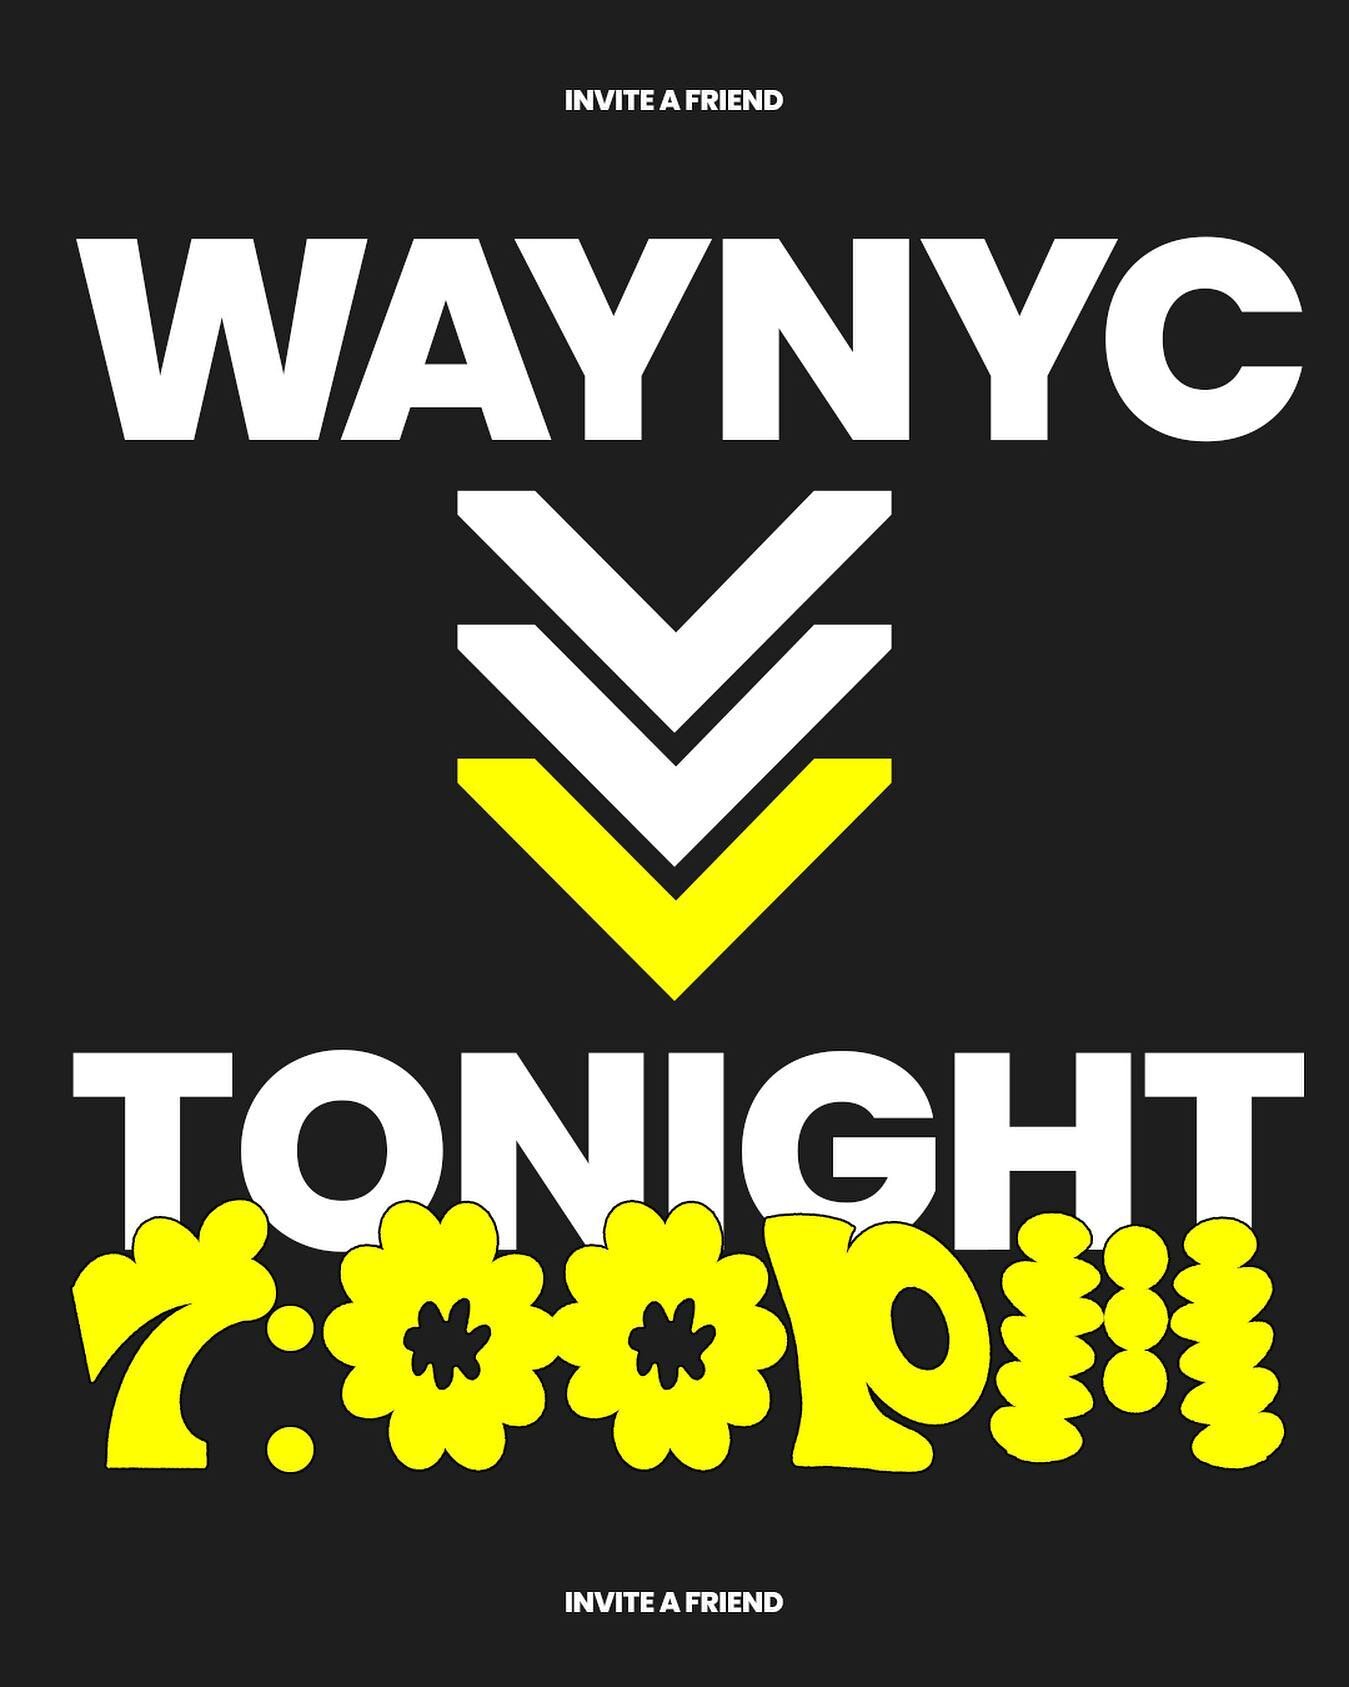 WAYNYC! Join us tonight at 7:00PM for a time of connection and discussion! Invite a friend! You don&rsquo;t want to miss it!